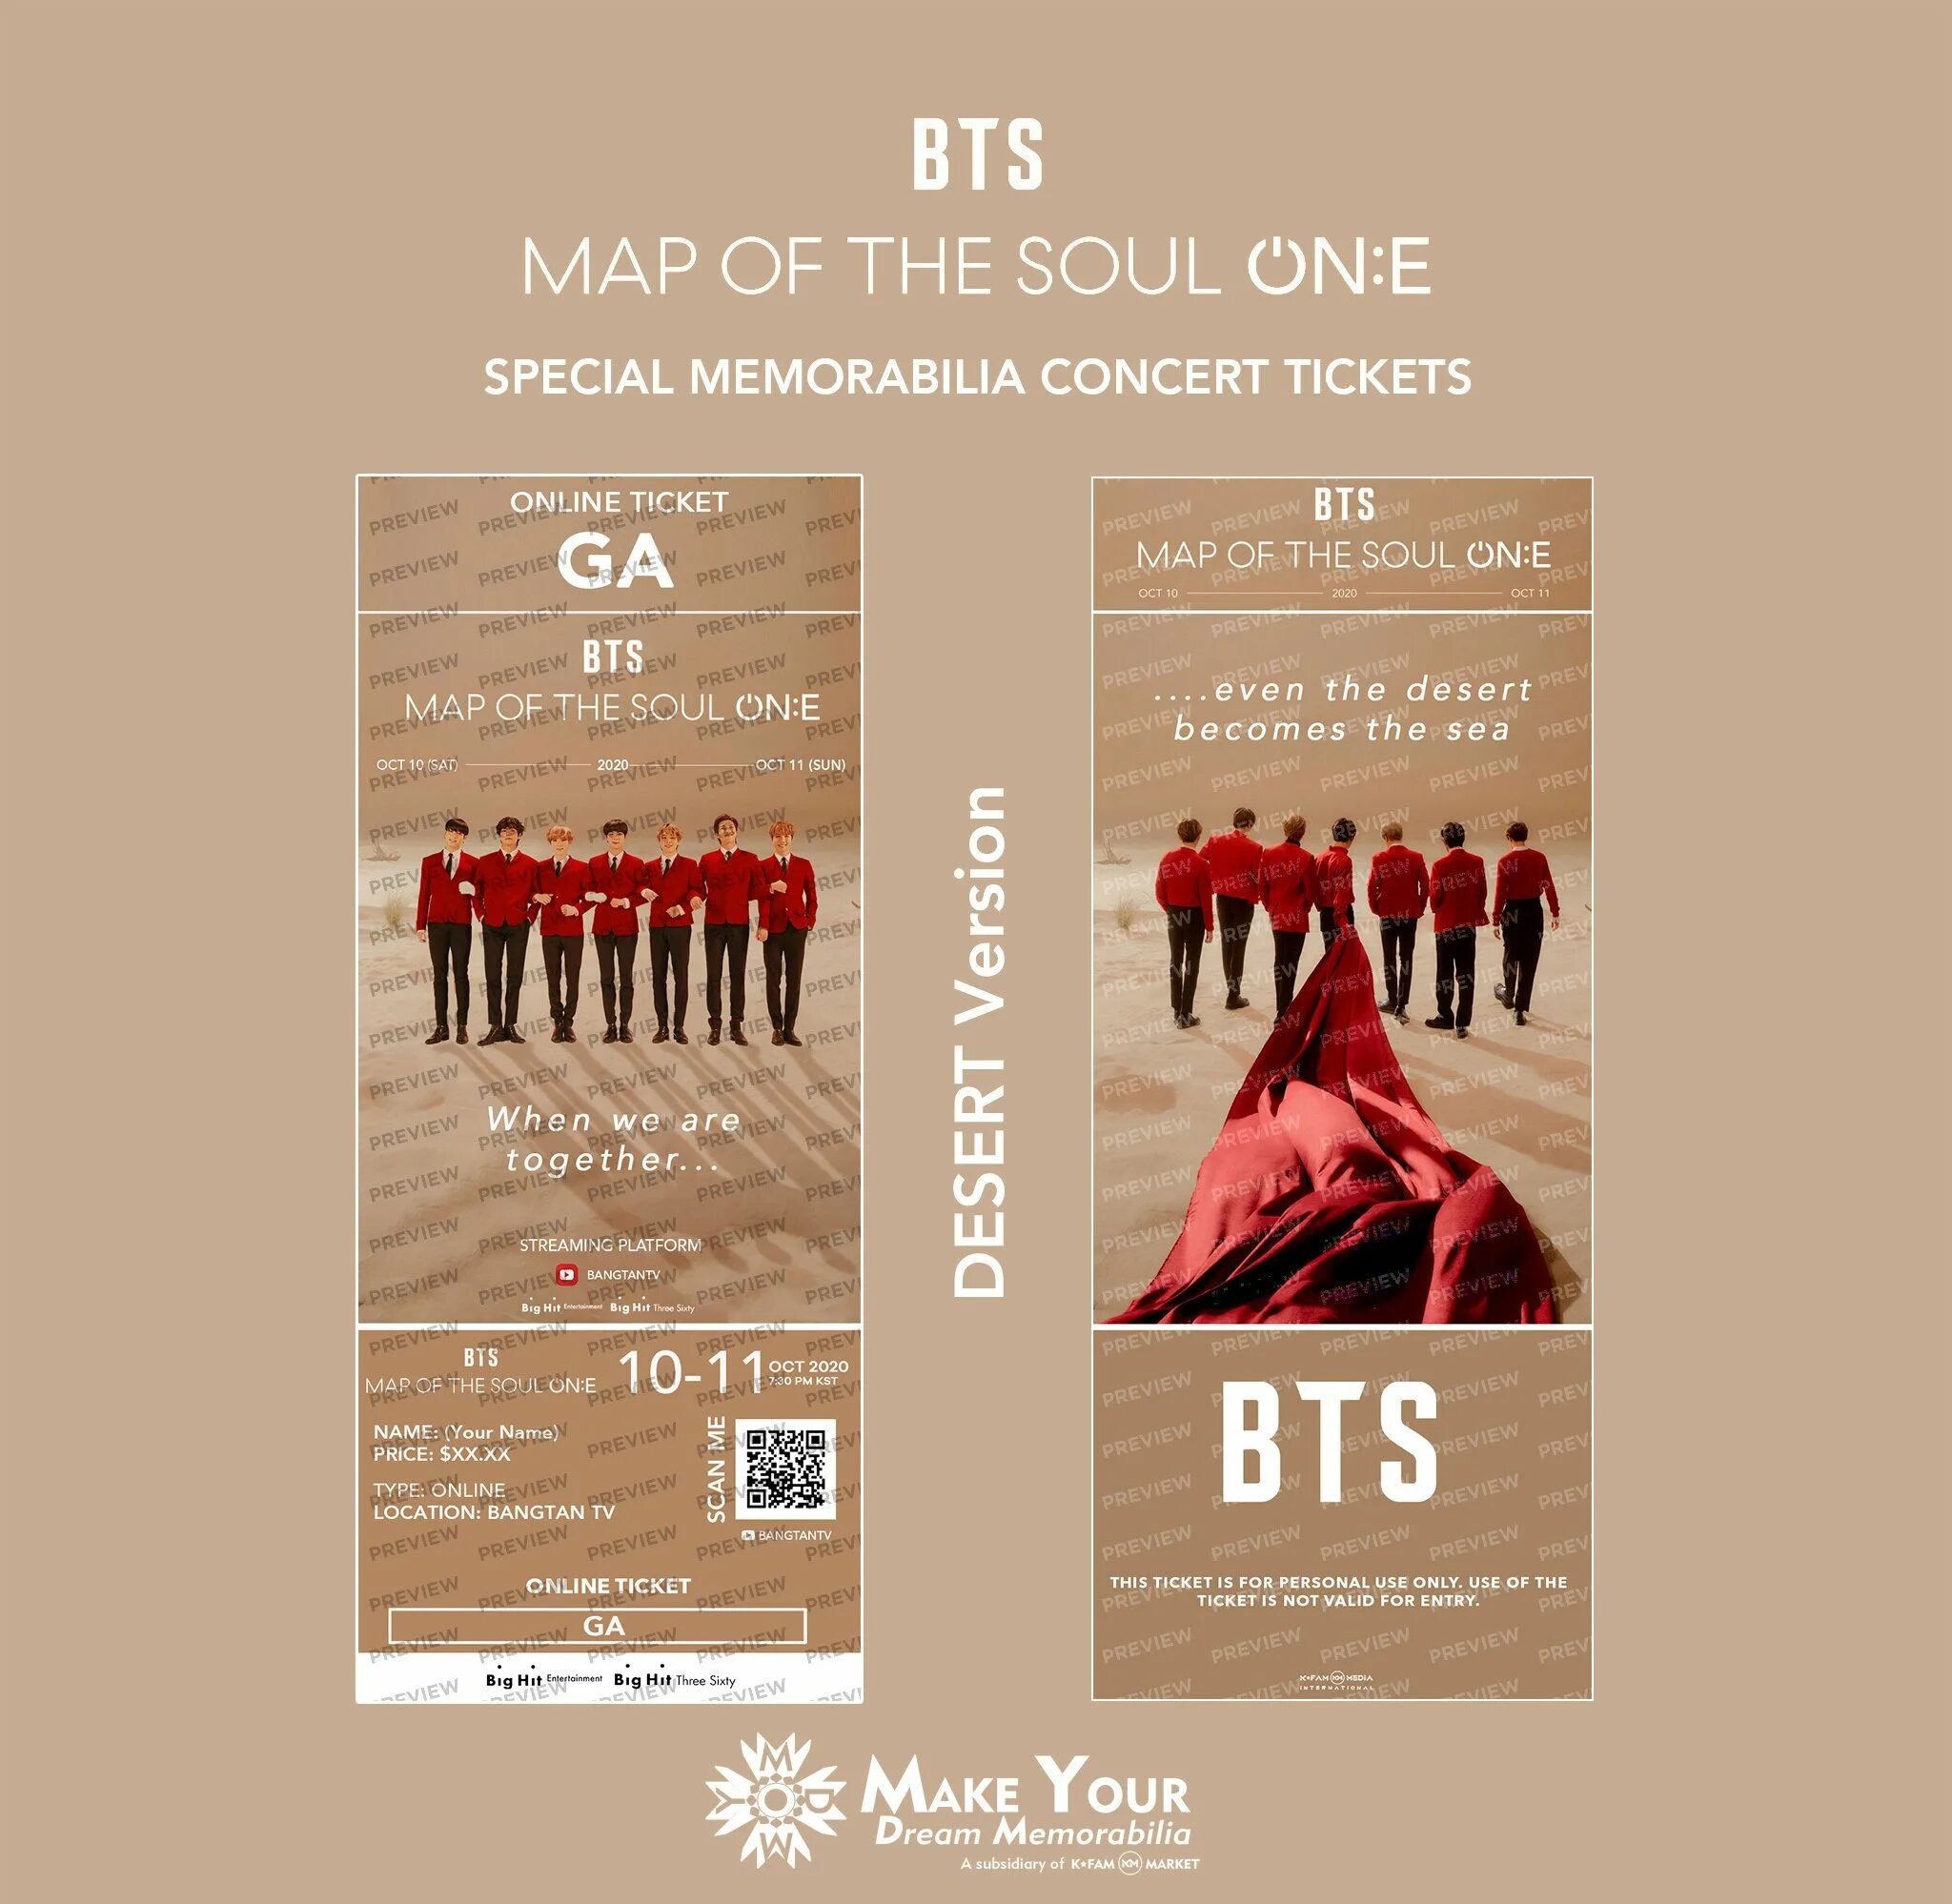 Soul ticket type soul. BTS Concert 2020 Map of the Soul one. Концерт BTS Map of the Soul on:e. Map of the Soul one концерт. BTS Map of the Soul концерт.